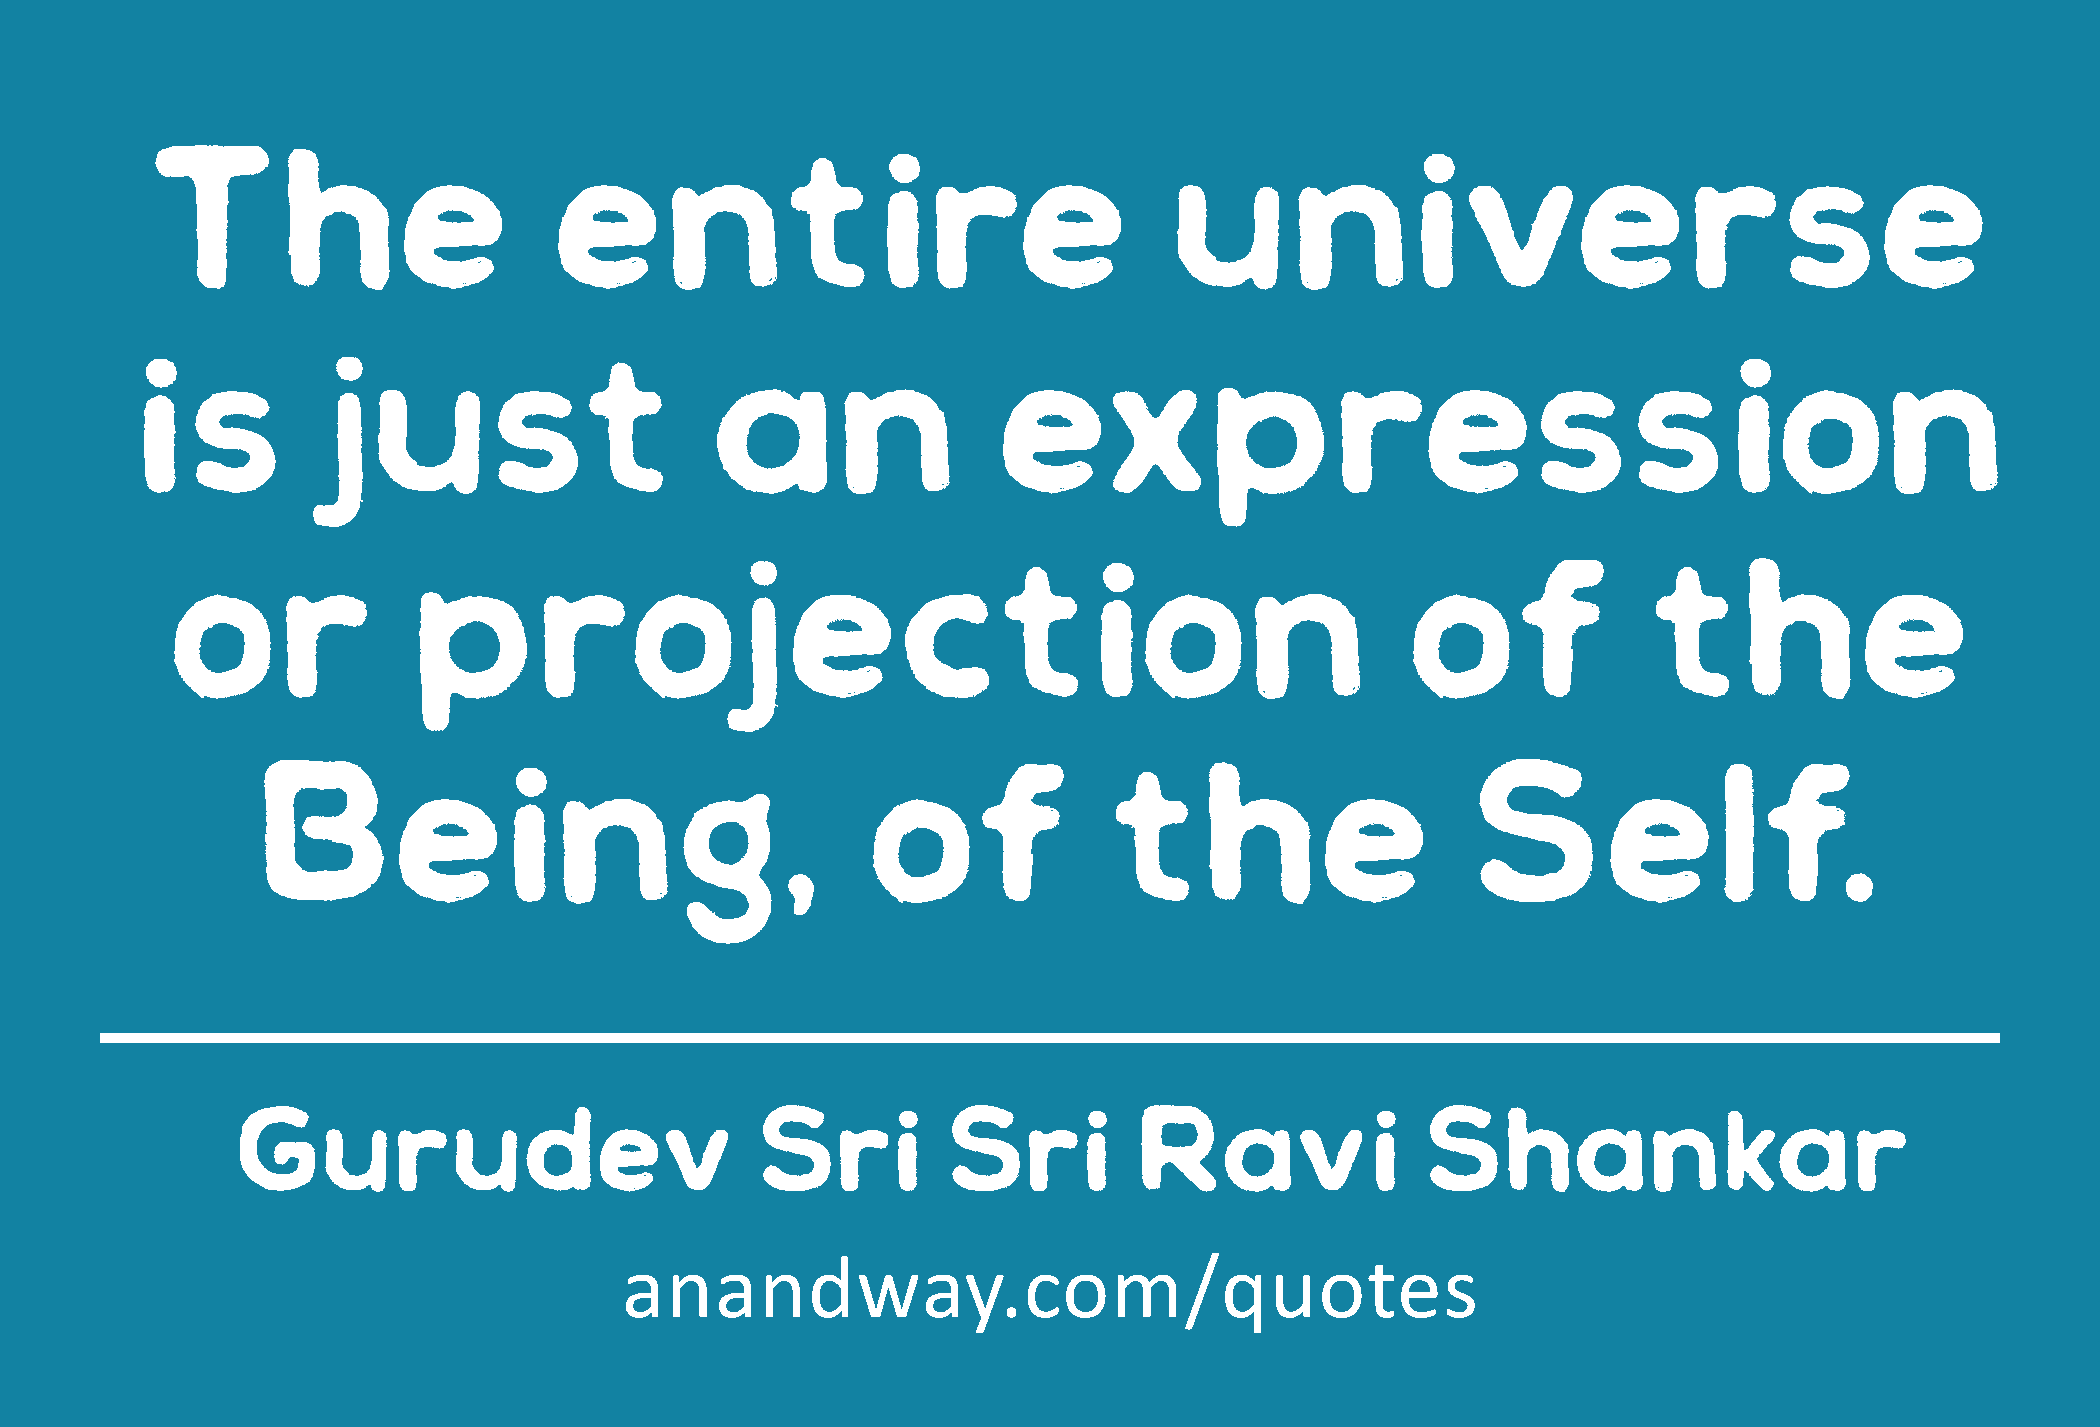 The entire universe is just an expression or projection of the Being, of the Self. 
 -Gurudev Sri Sri Ravi Shankar